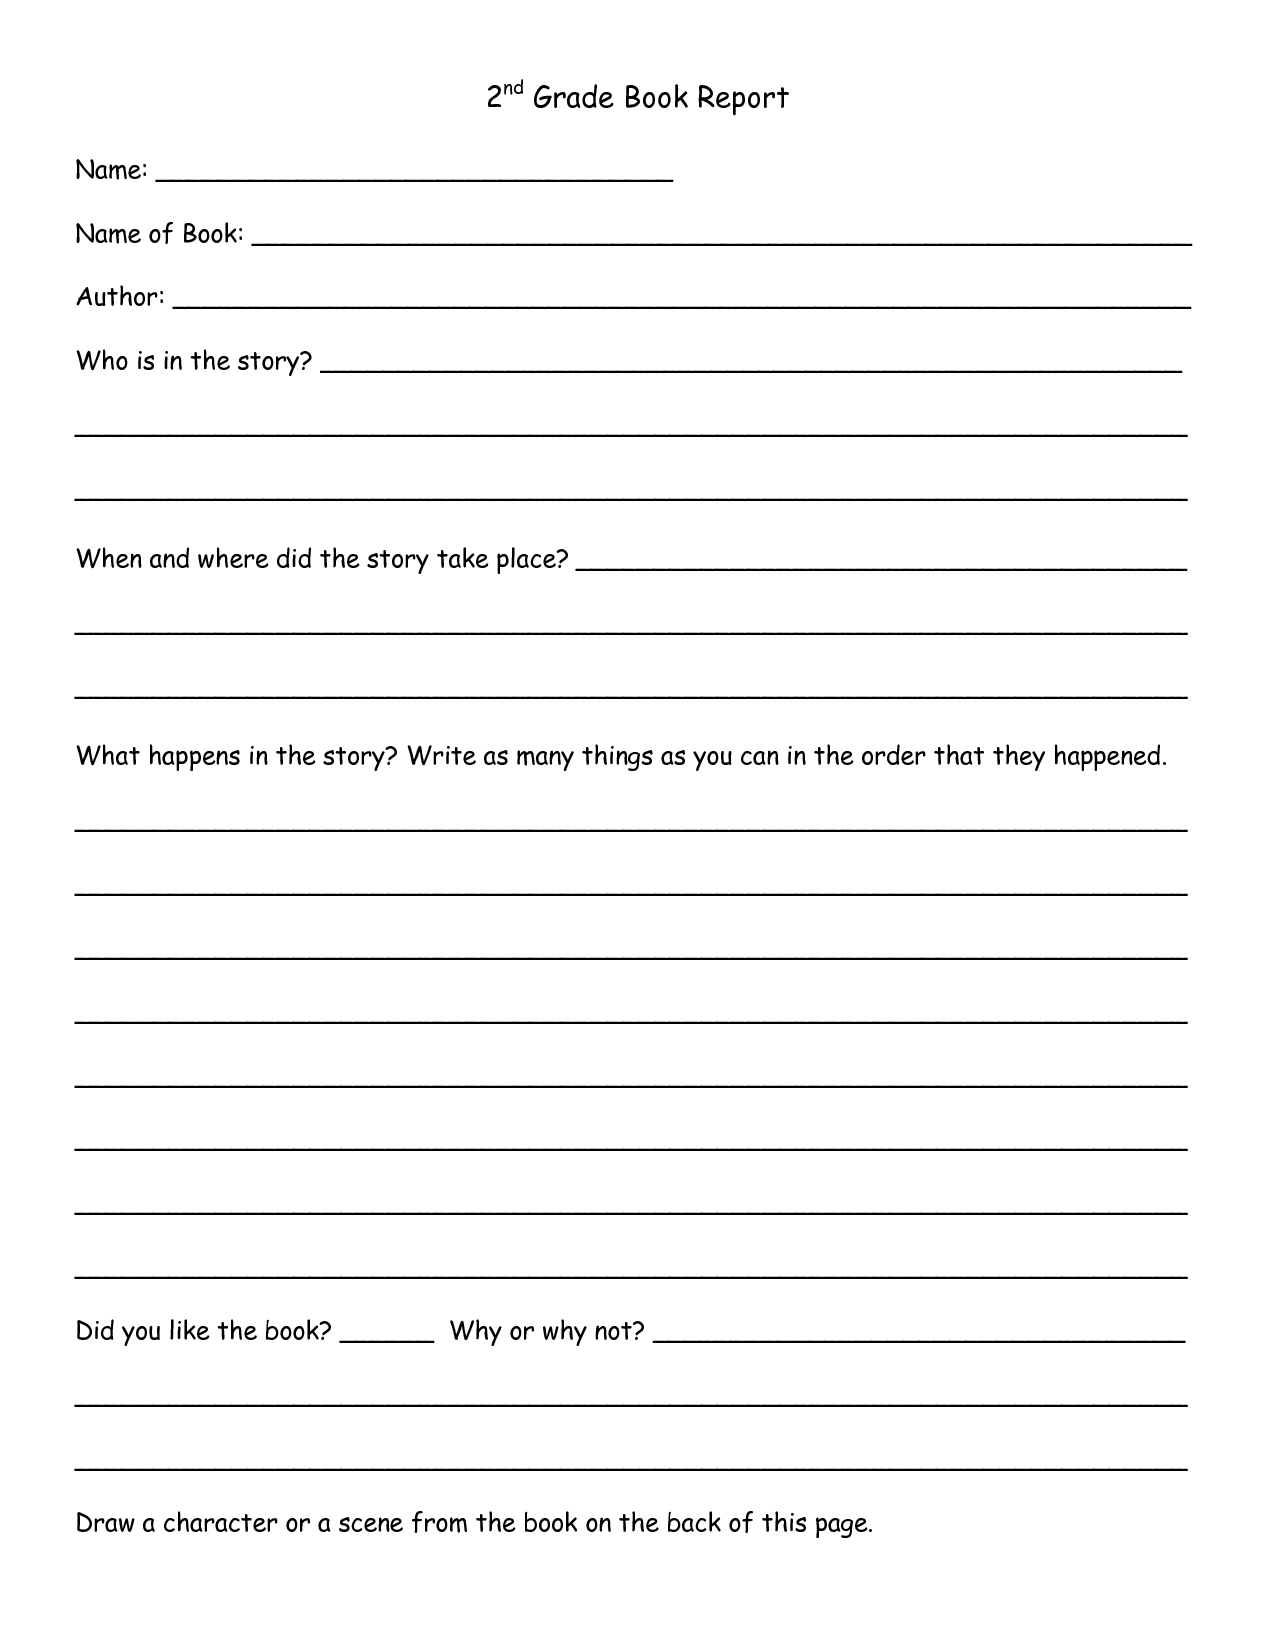 Book Report Worksheet | Printable Worksheets And Activities Throughout First Grade Book Report Template